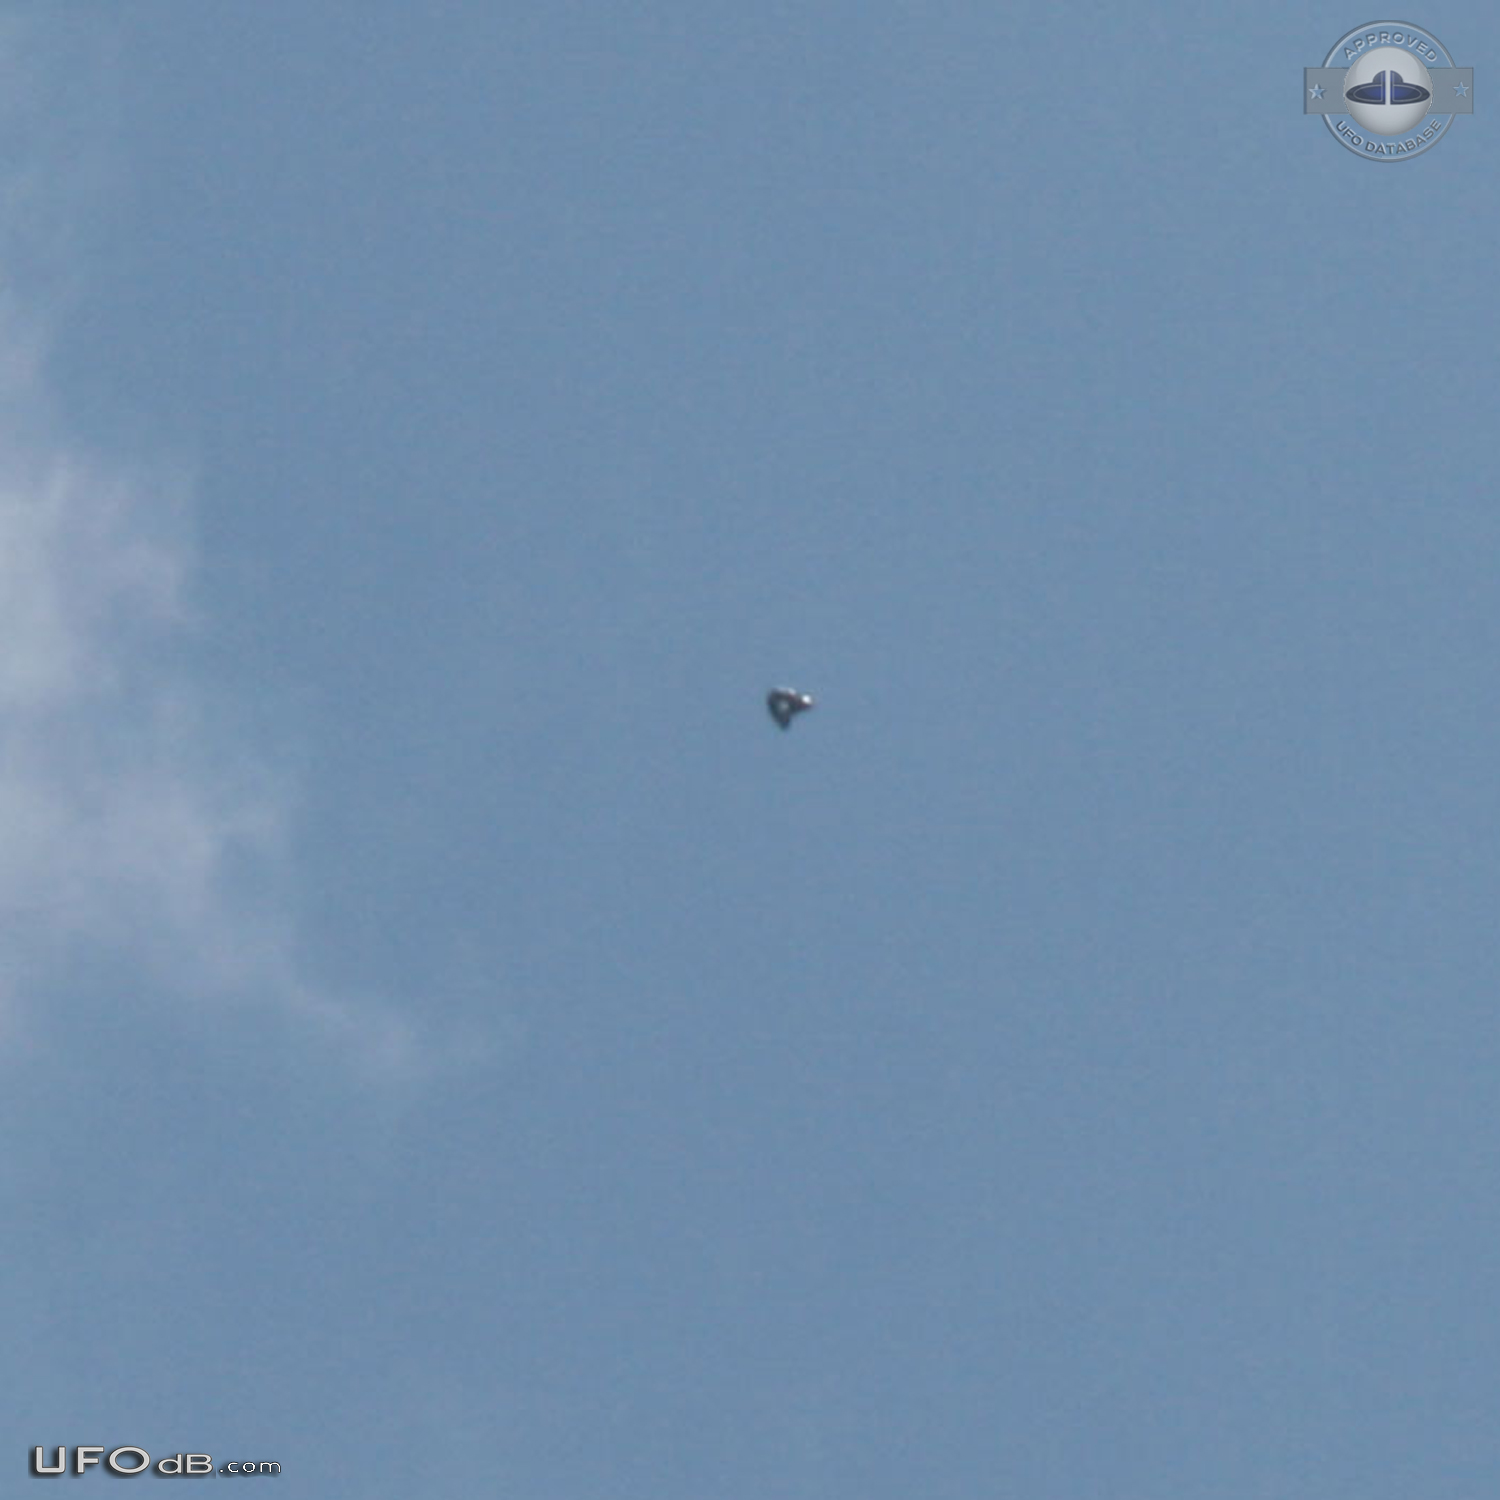 Watched UFO first in the west move quickly through to north east - Gle UFO Picture #740-5